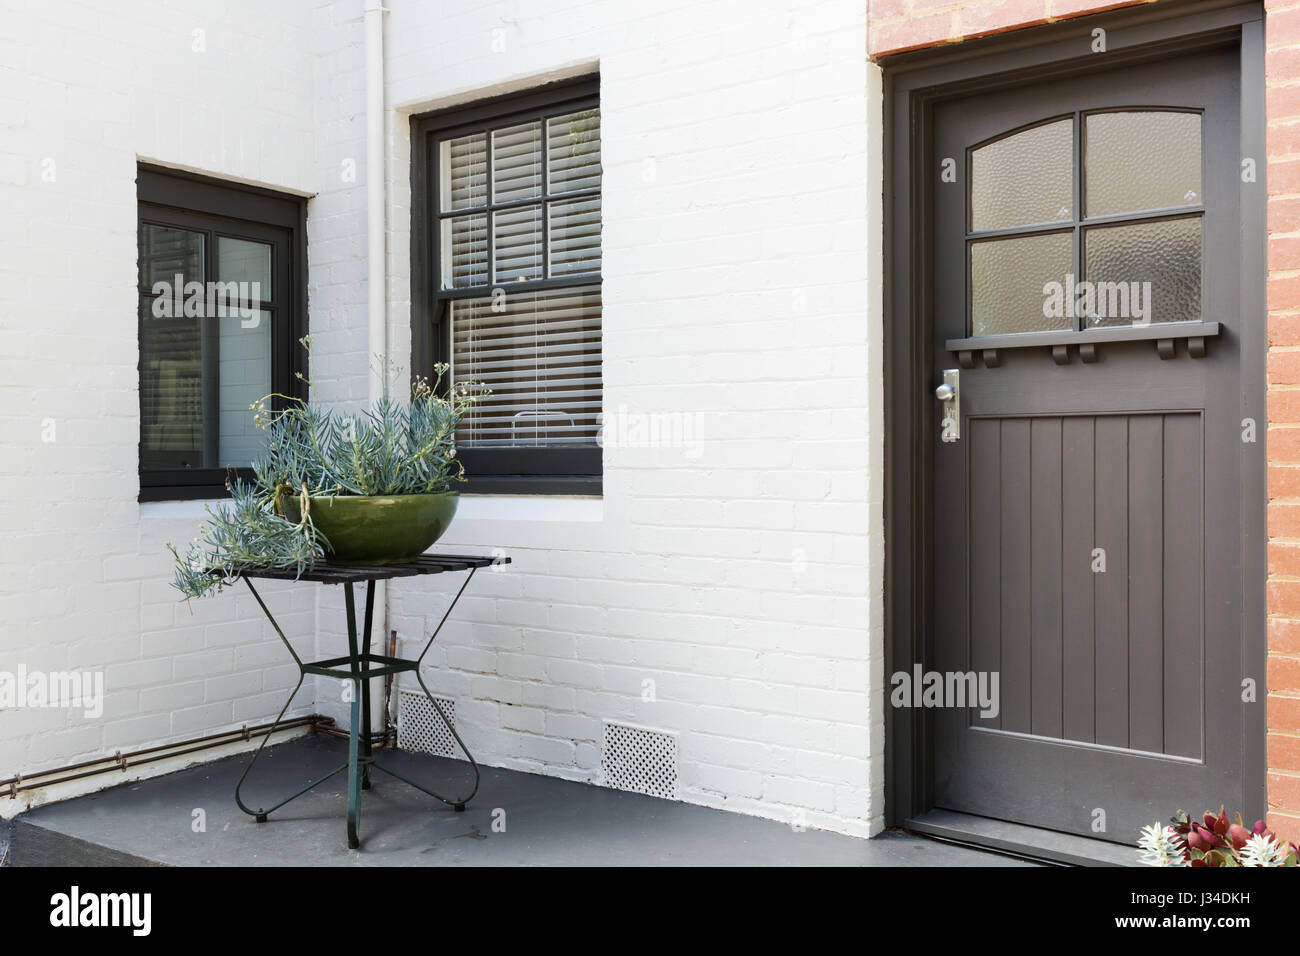 Entry porch and frnt door of an art deco style apartment in Australia Stock Photo